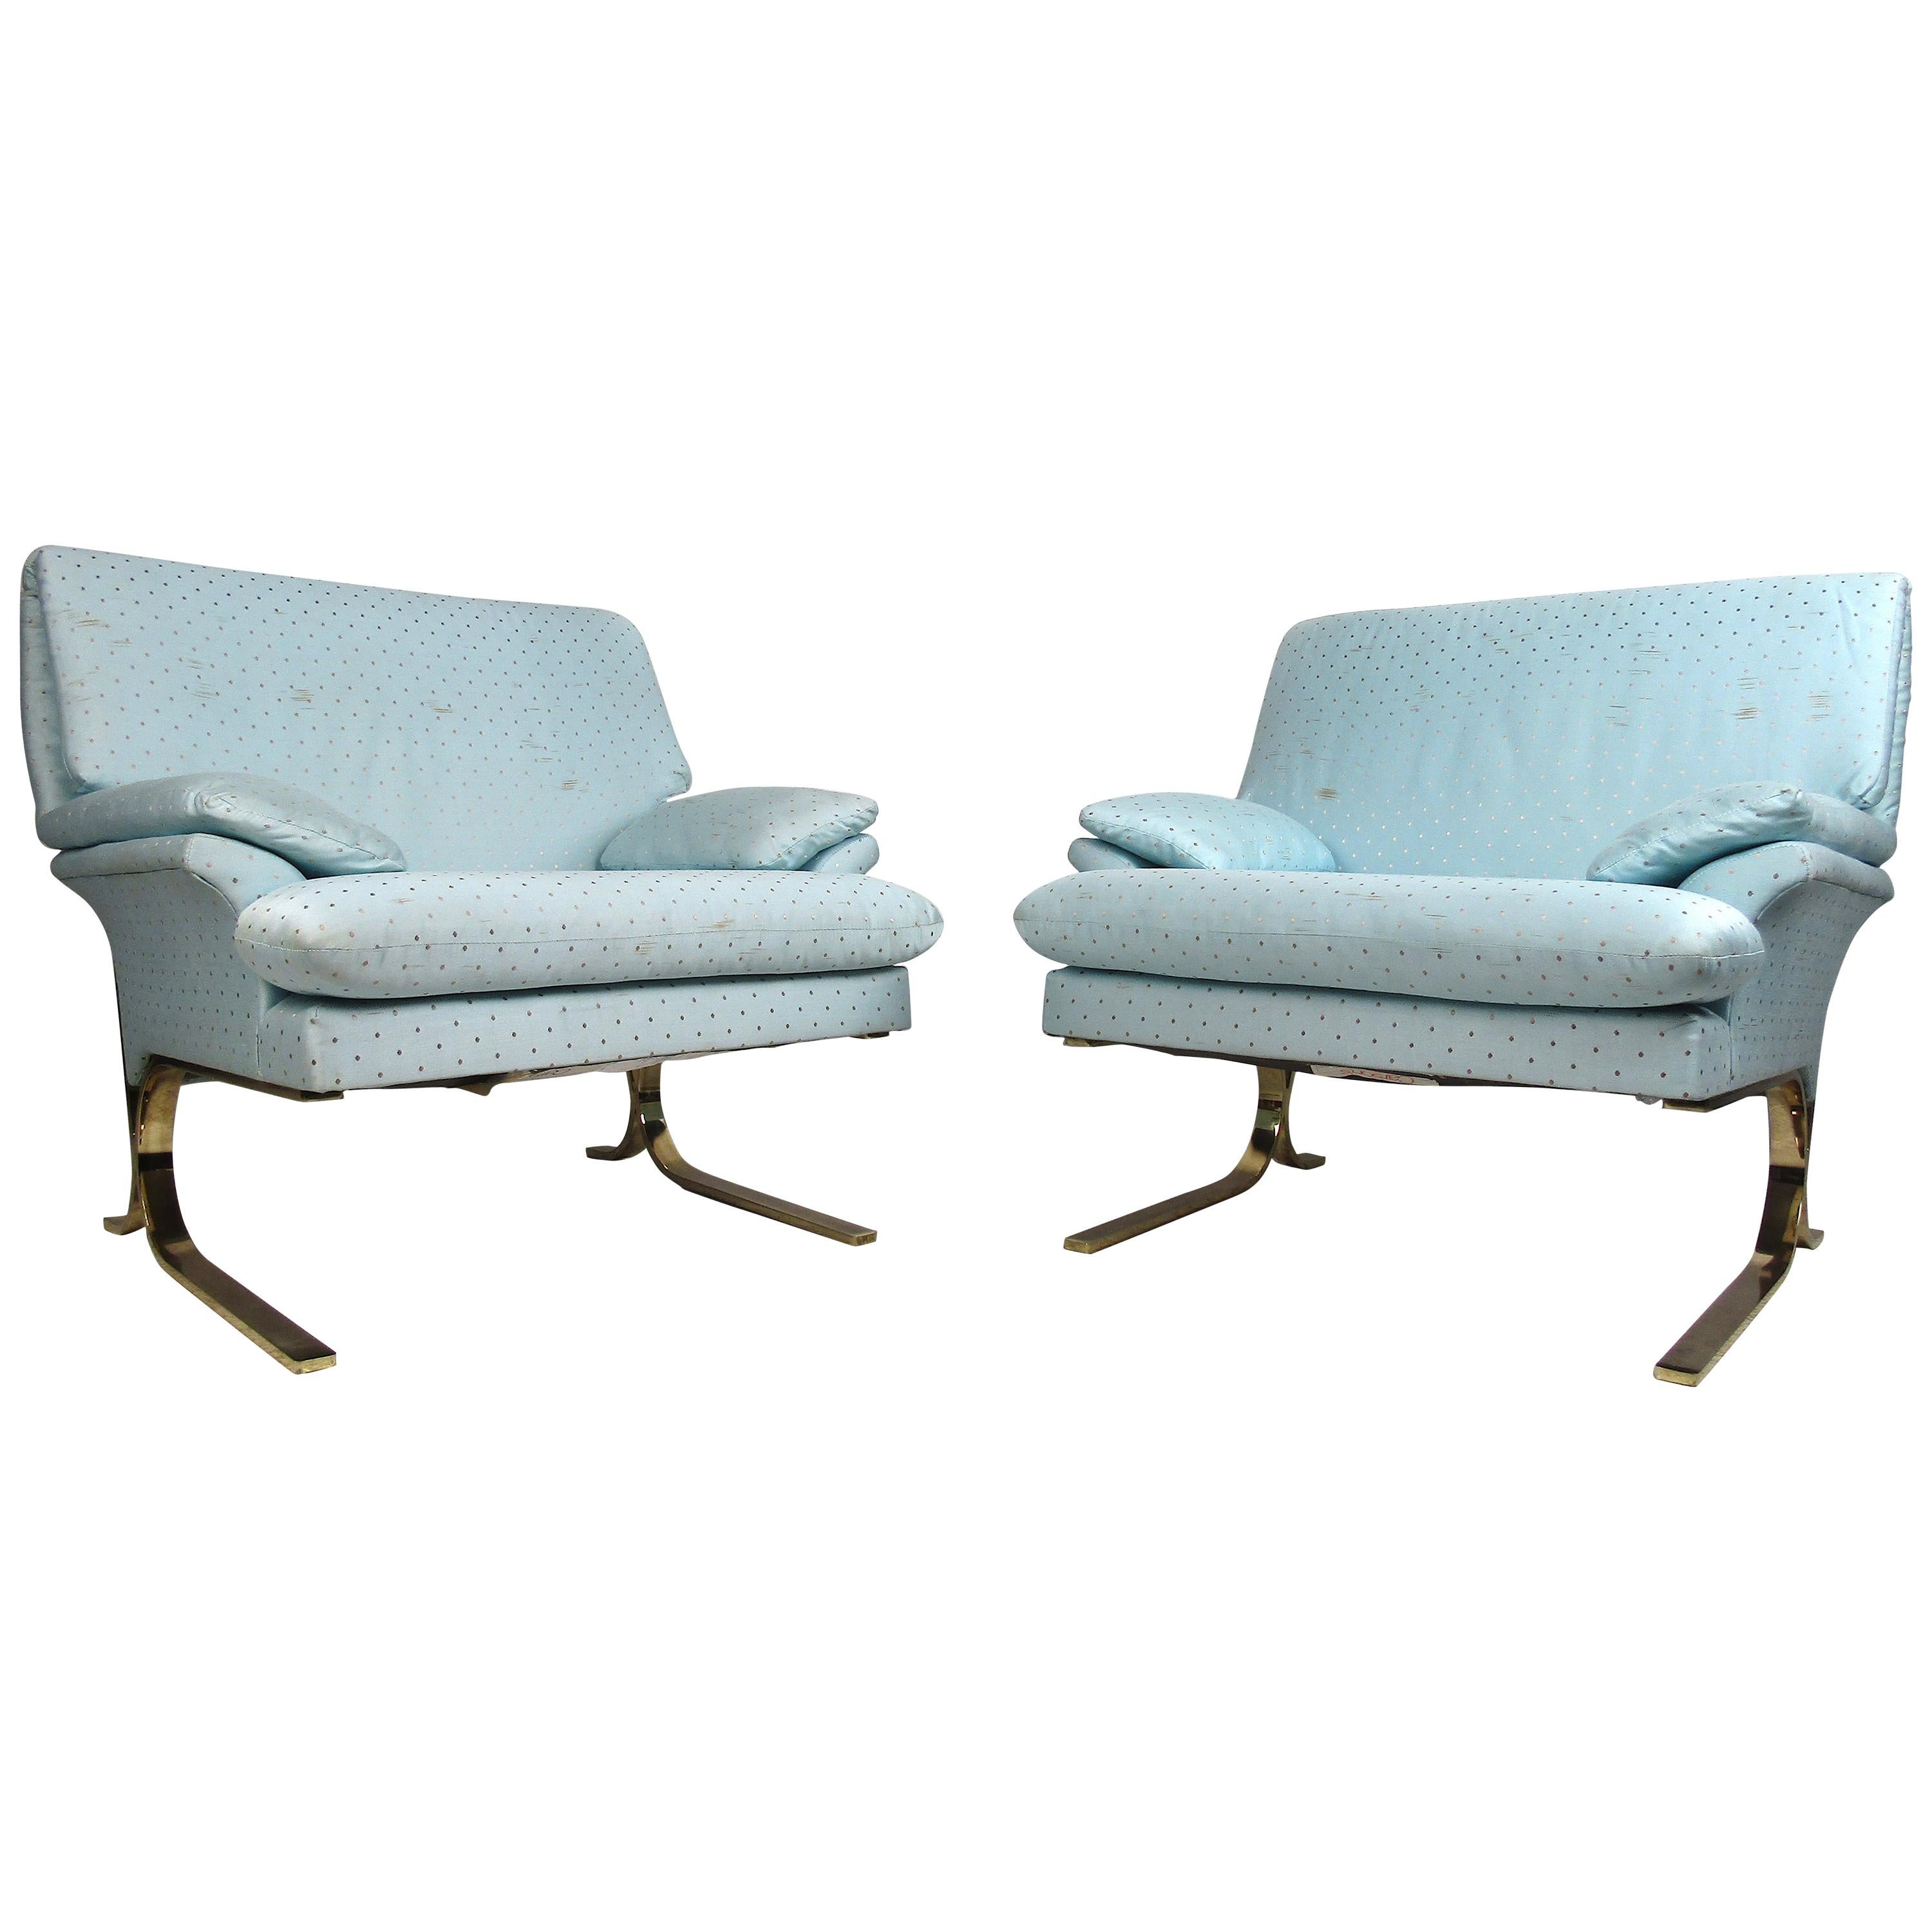 Vintage Modern Milo Baughman Style Cantilever Lounge Chairs